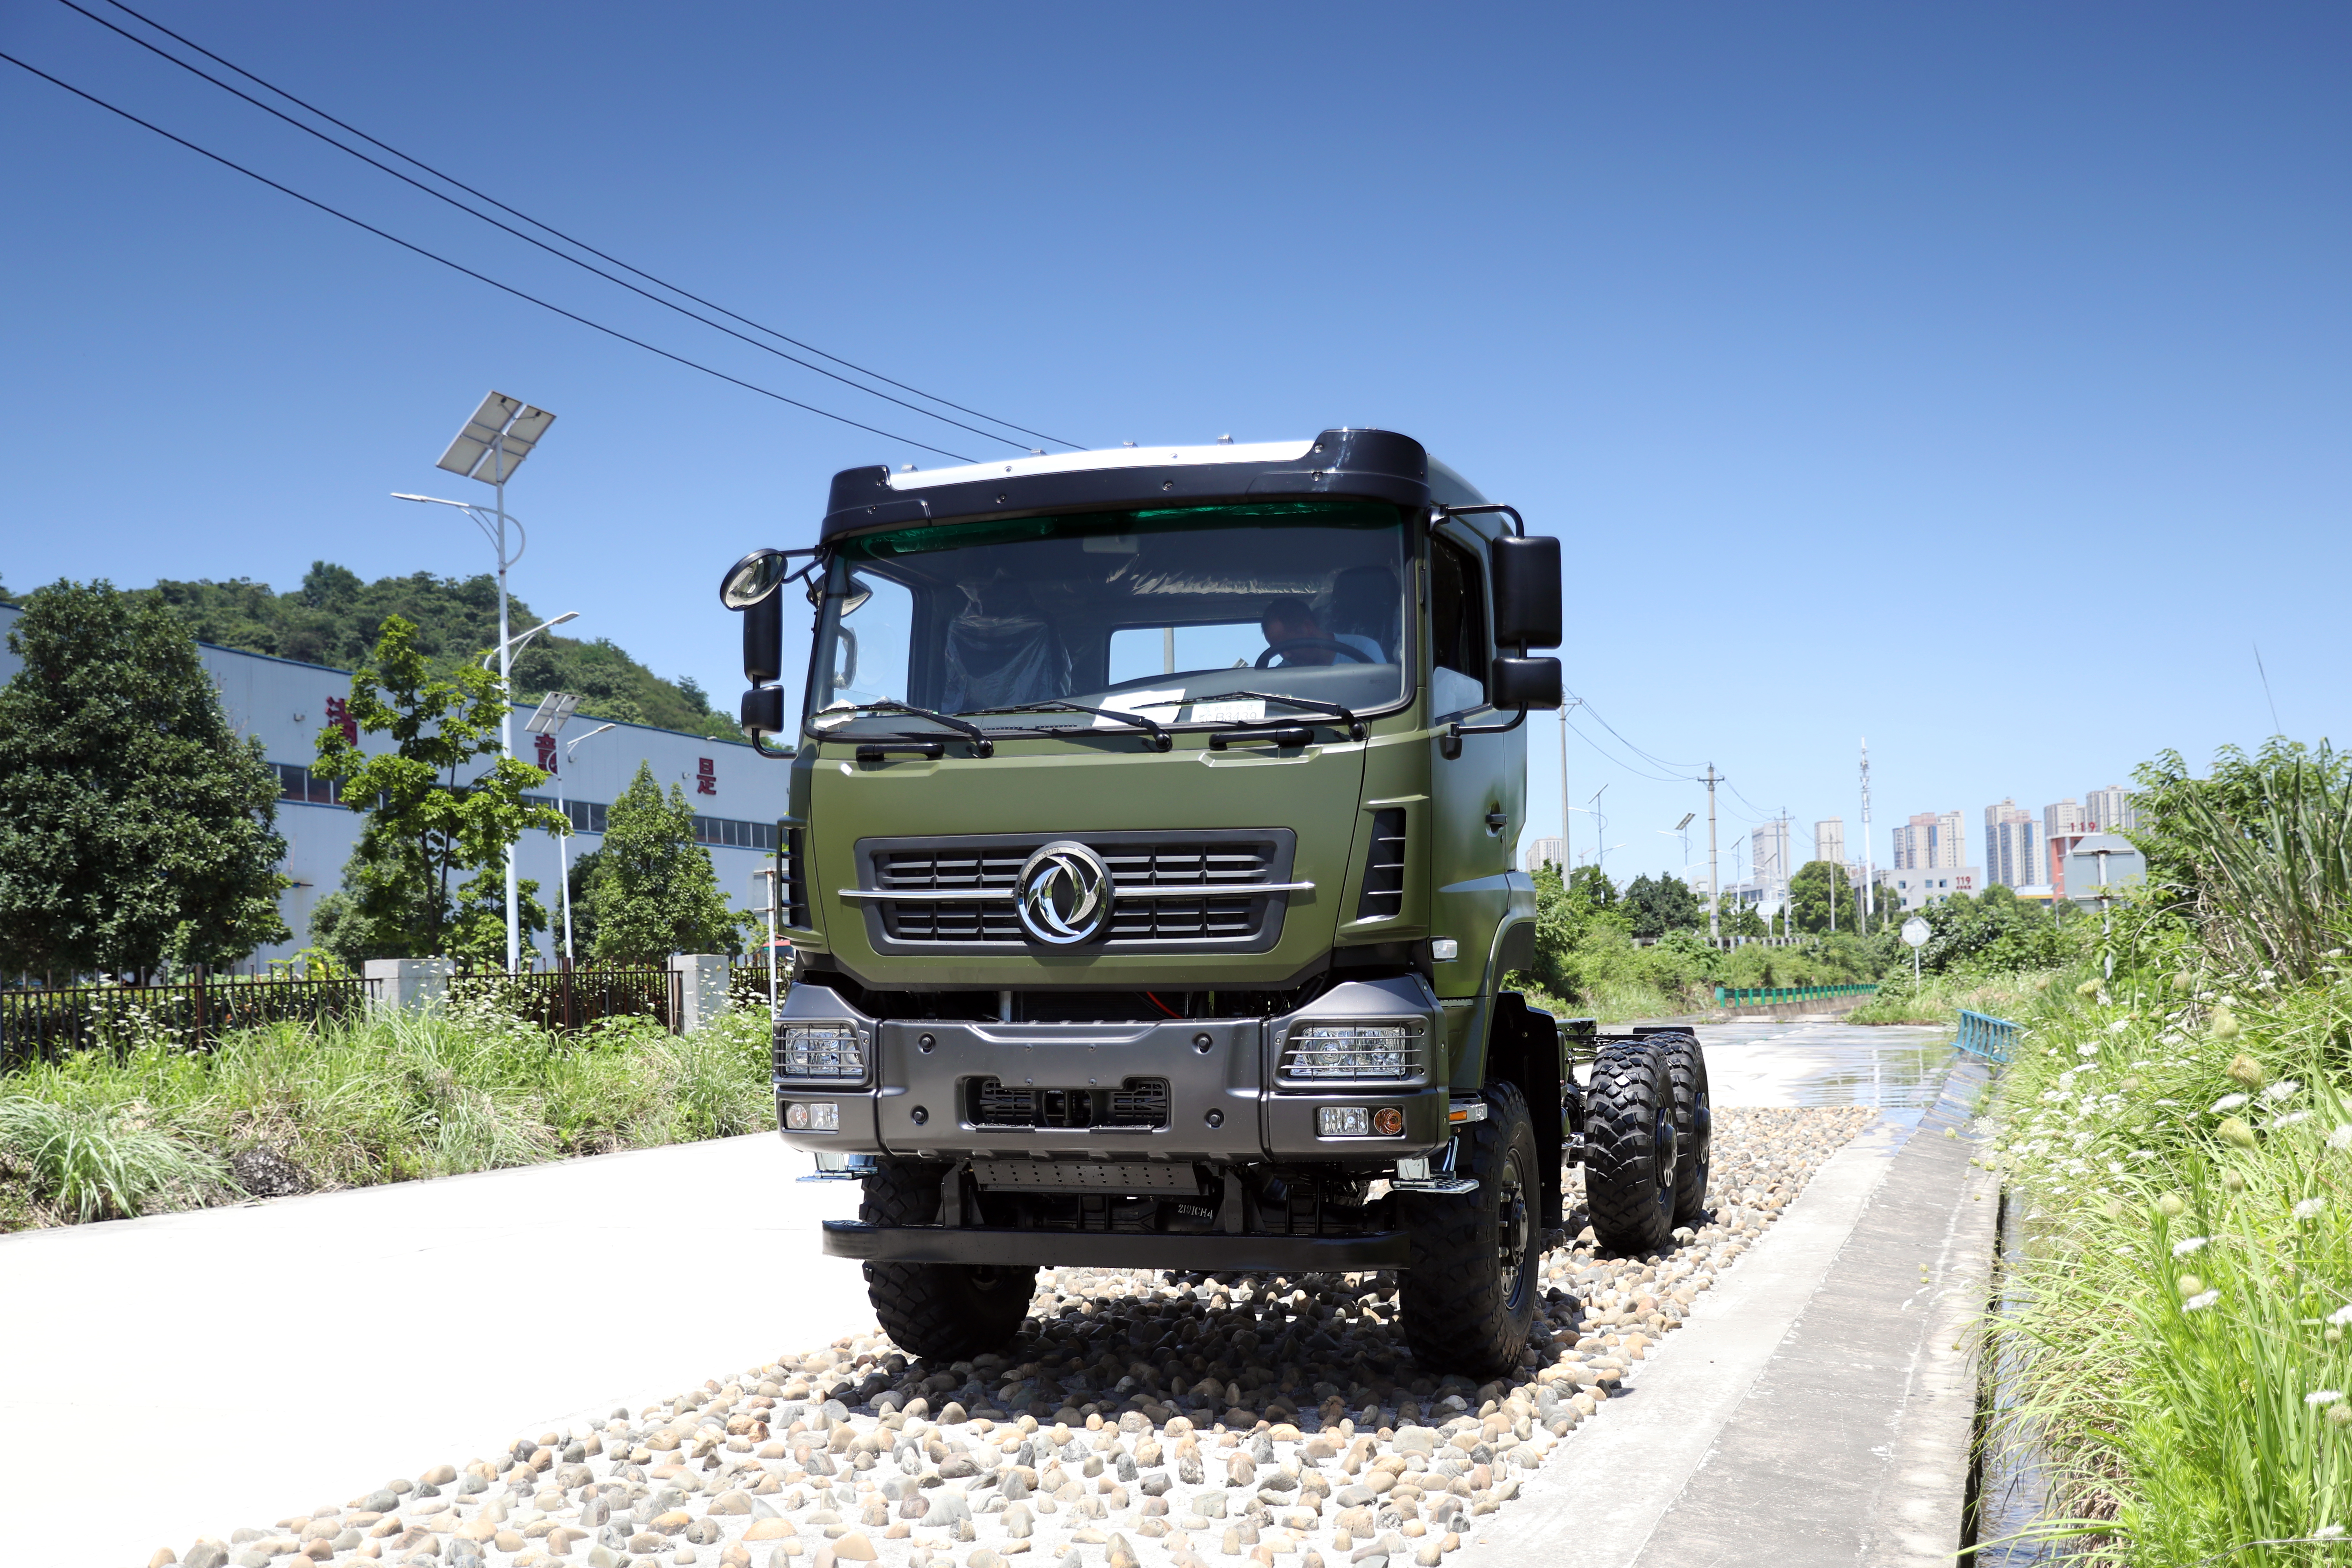 “Dongfeng 6WD 25-ton chassis for heavy-duty trucks with full materials